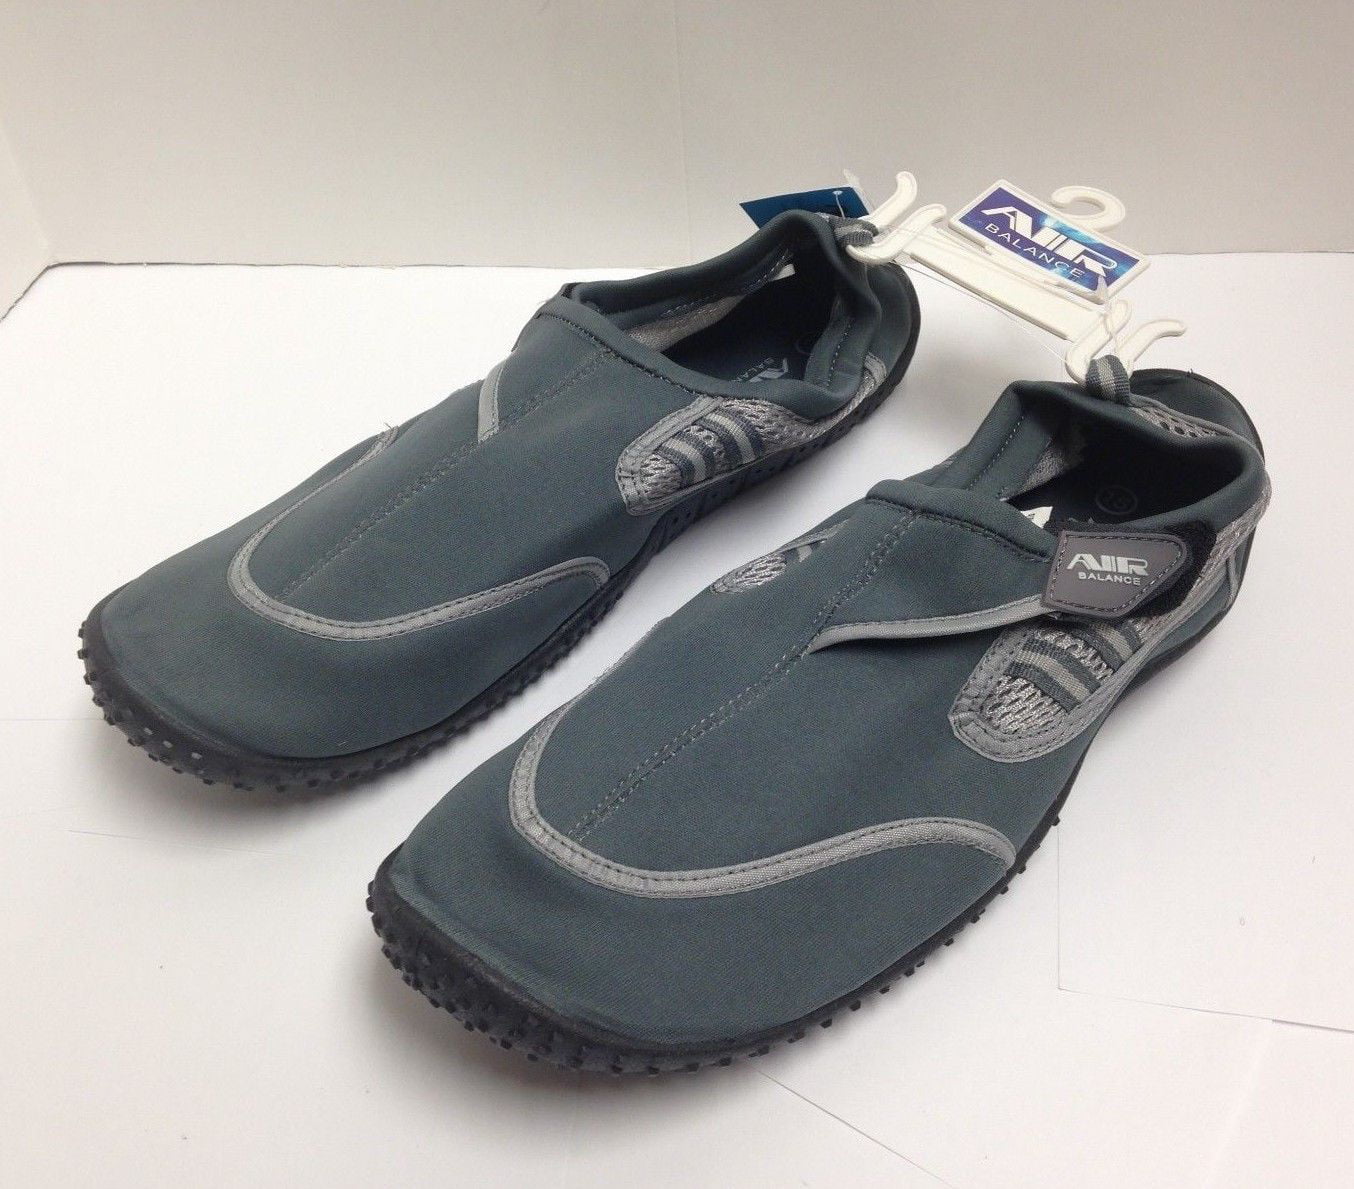 size 15 men's water shoes